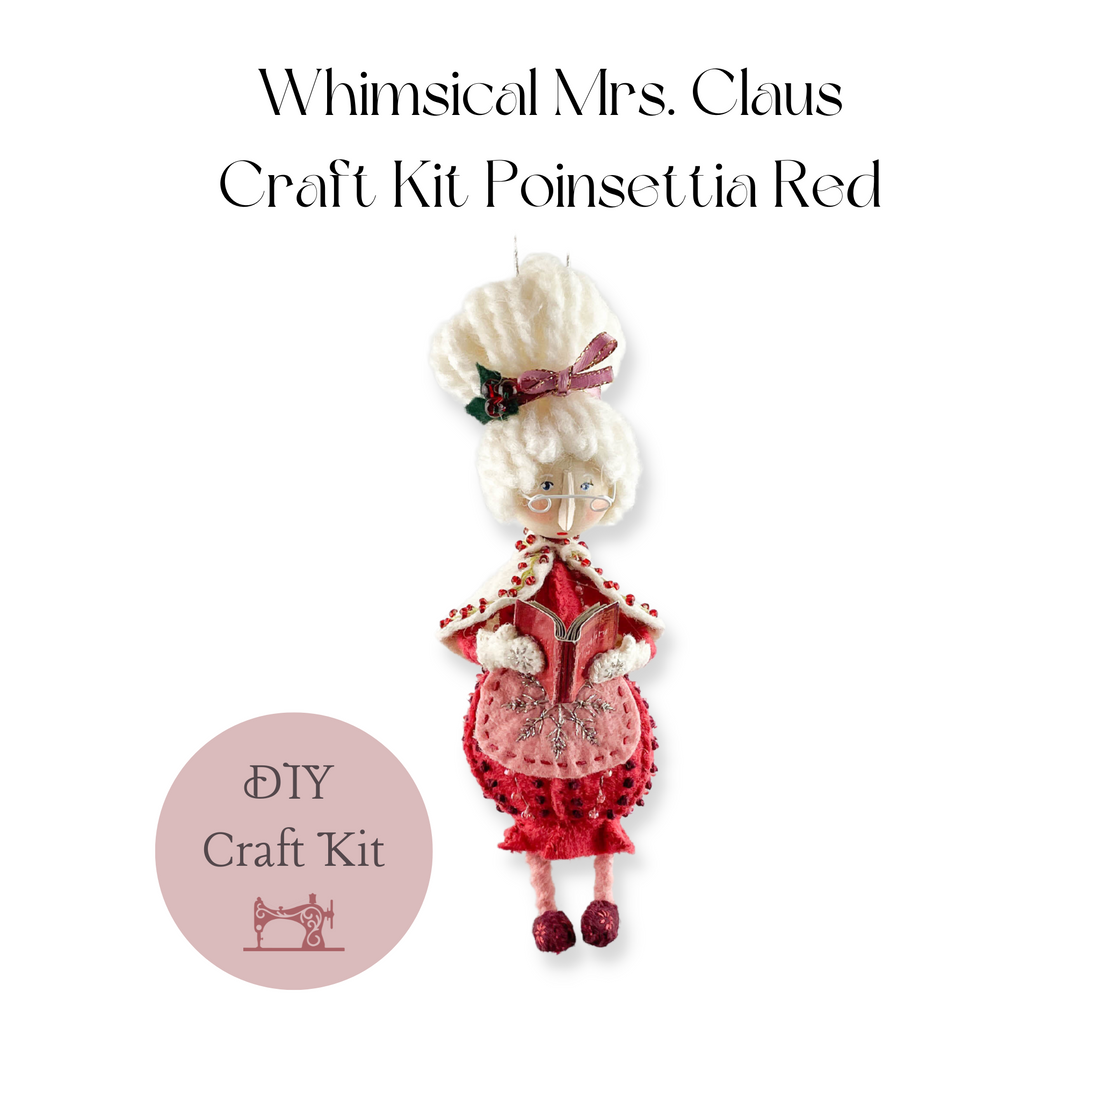 Whimsical Mrs. Claus Ornament Craft Kit Poinsettia Red